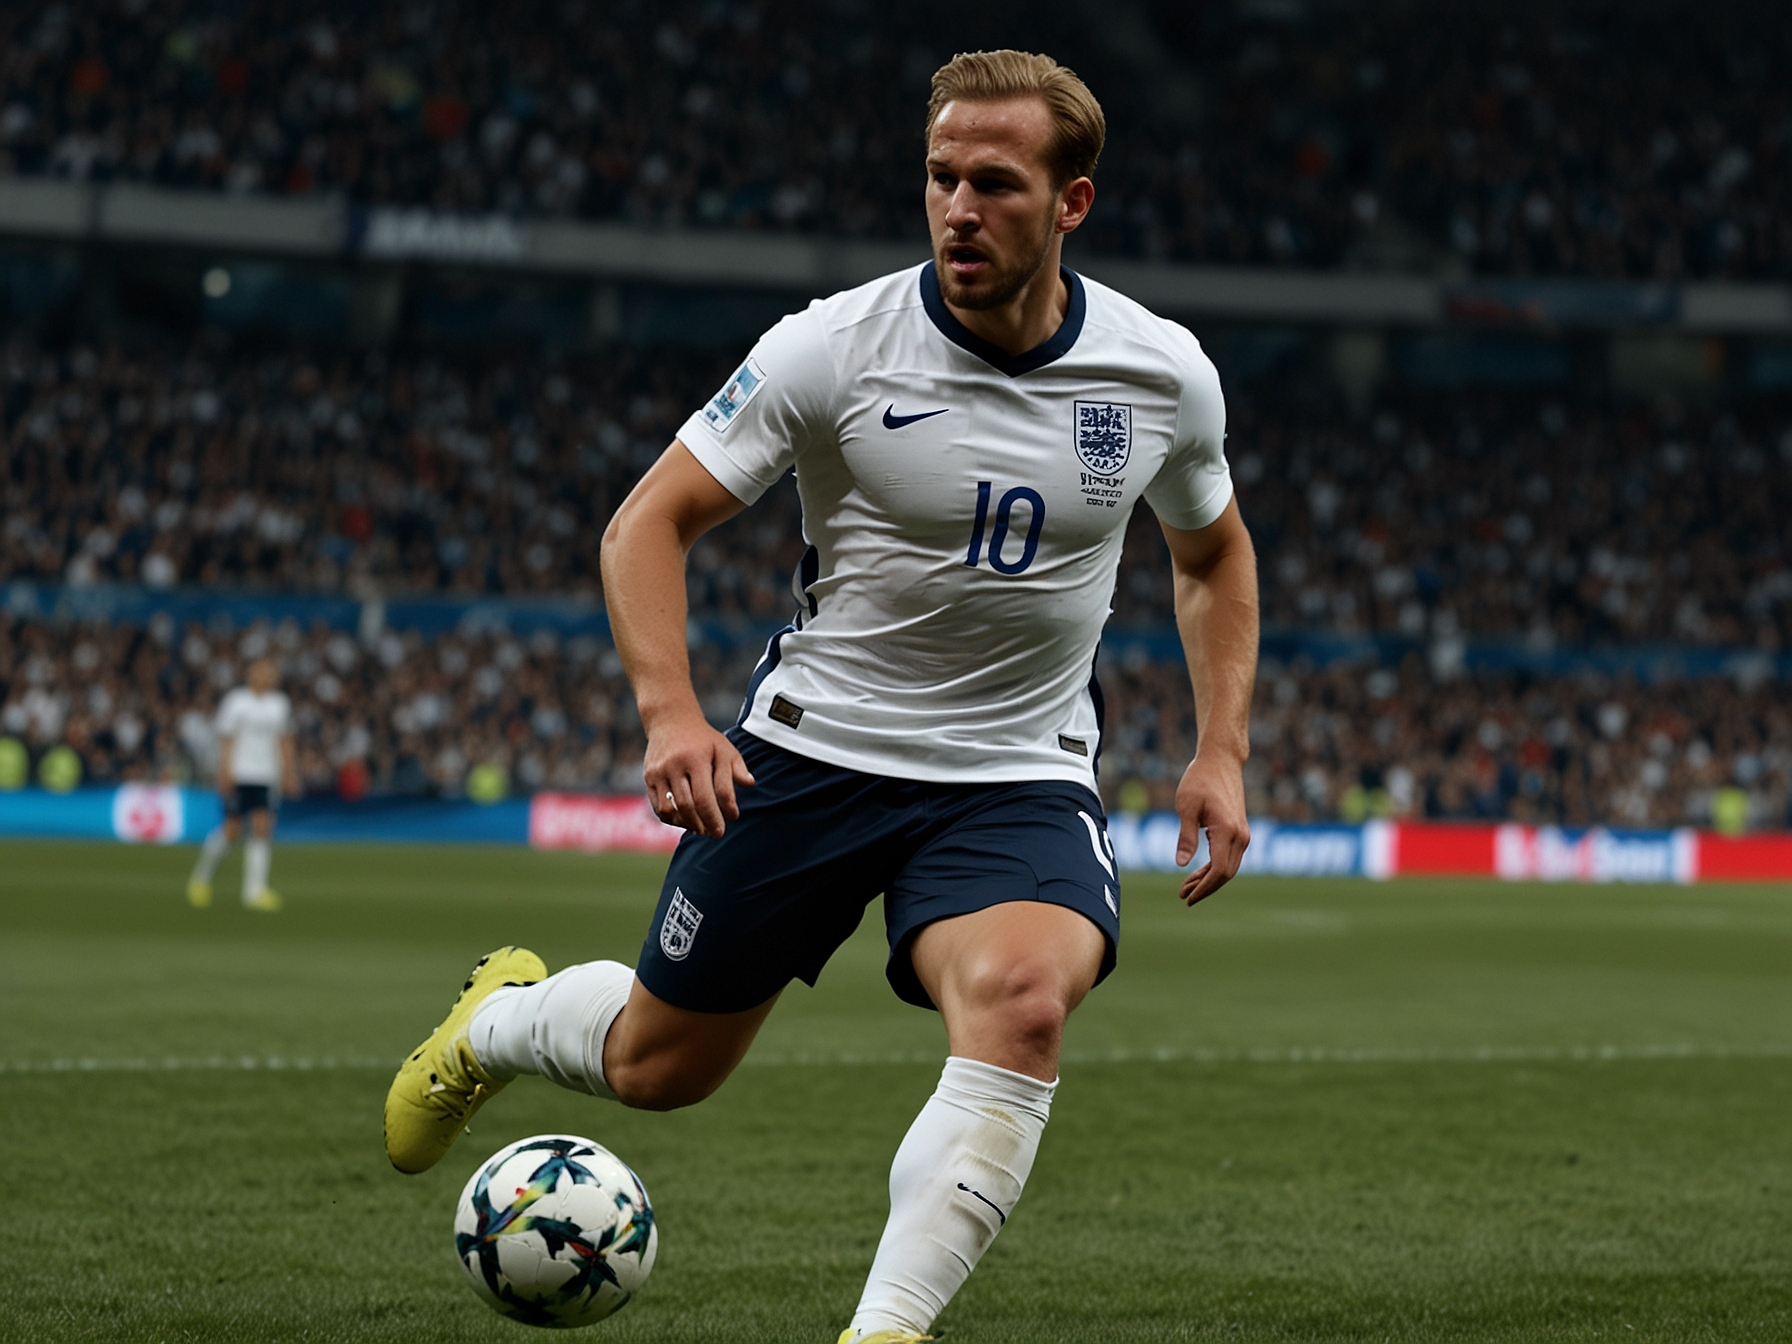 An illustration of England's Harry Kane struggling in a deeper midfield role during the match against Slovenia, highlighting the positional challenges and how it affected his goal-scoring ability.